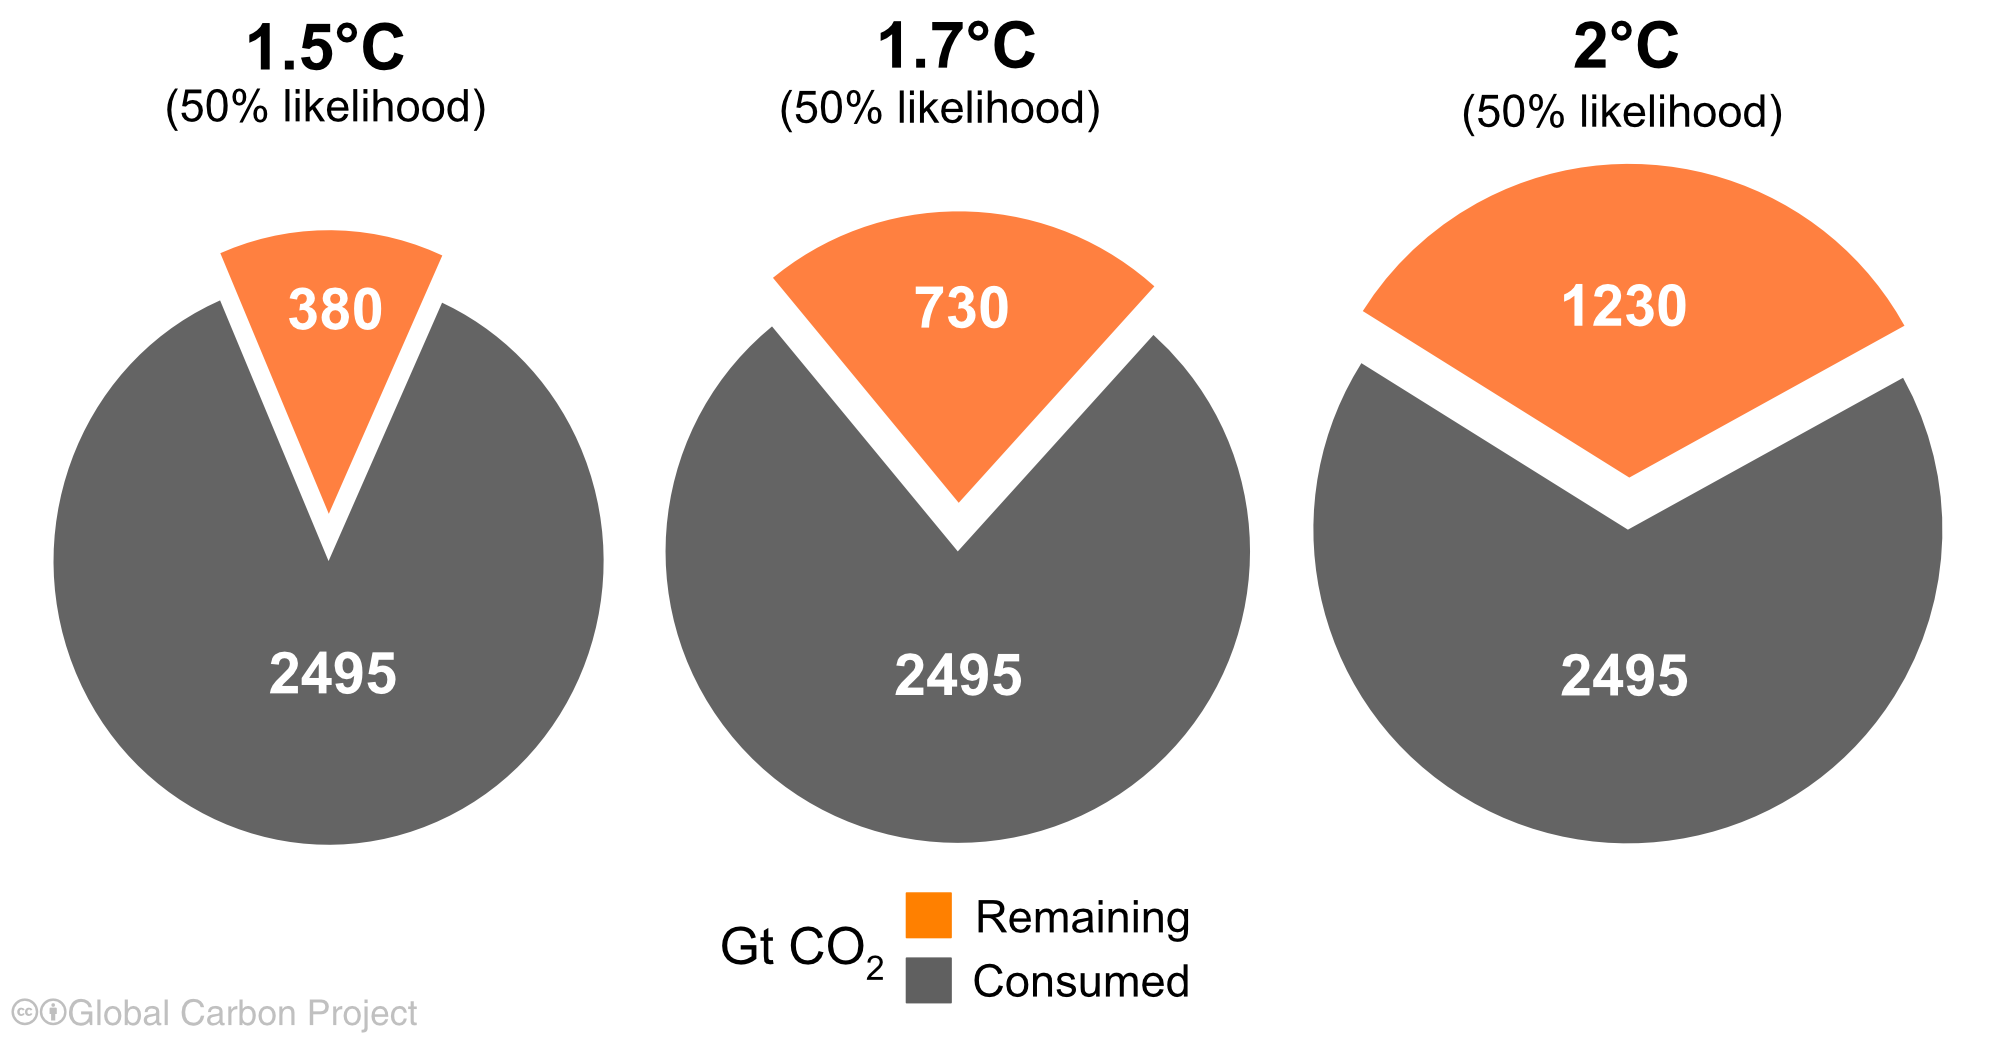 Pie charts showing the remaining carbon budget to limit global warming to 1.5°C, 1.7°C and 2°C.